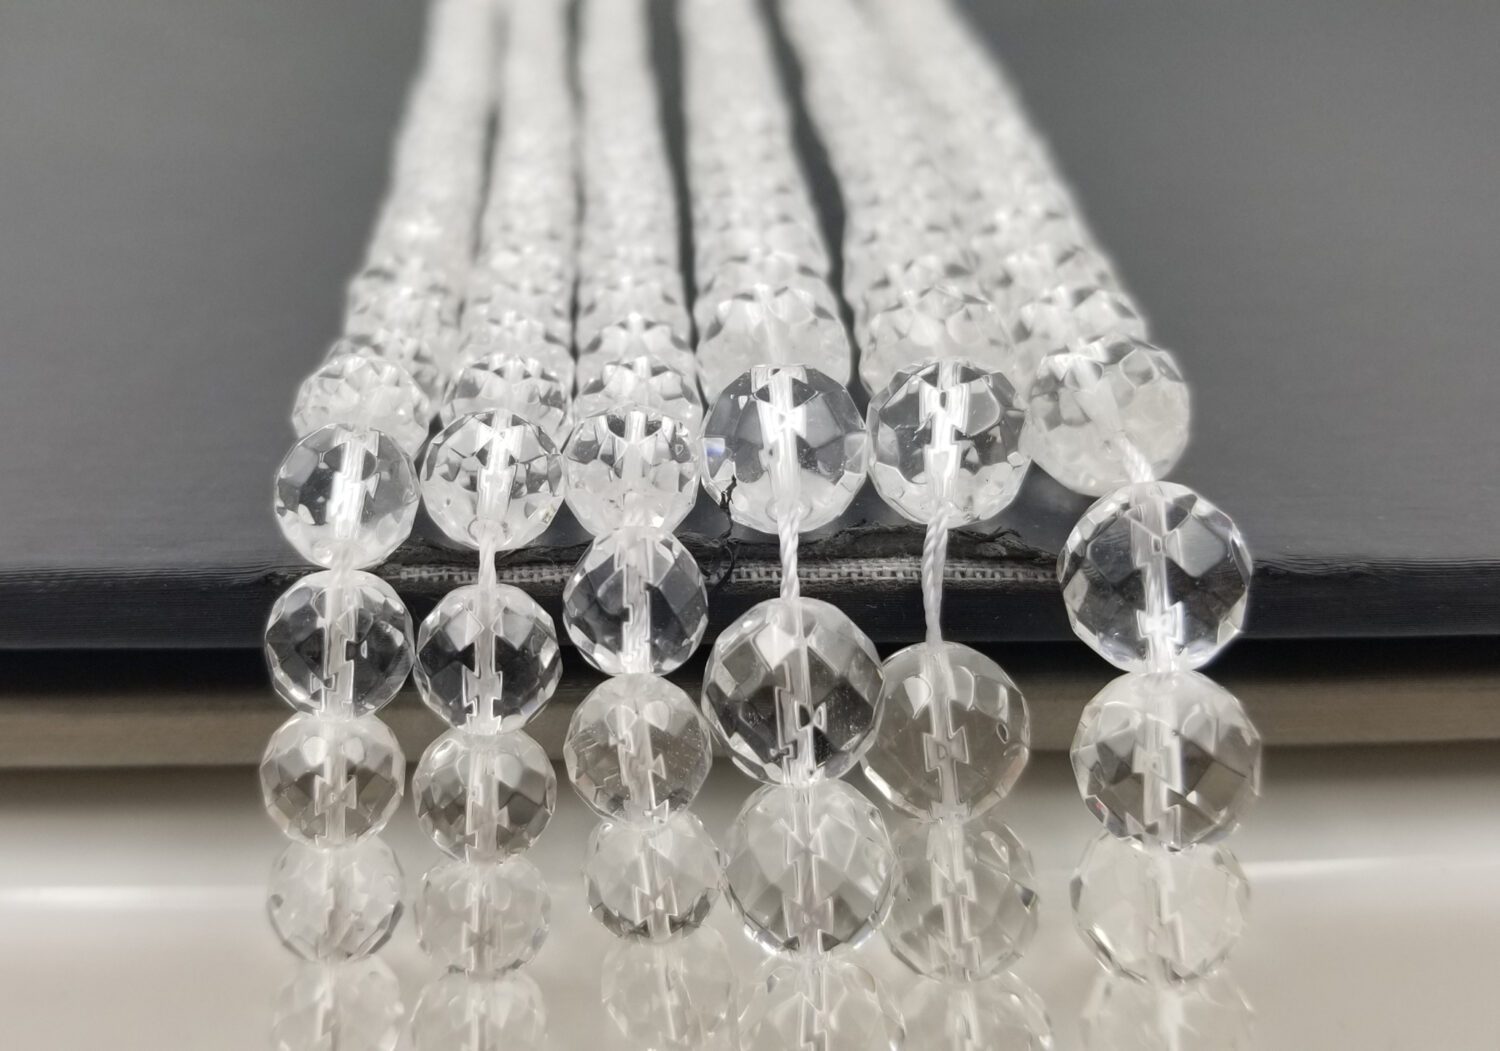 Clear Quartz Smooth Round Beads Full Strand 15.5 inches 6mm, 8mm